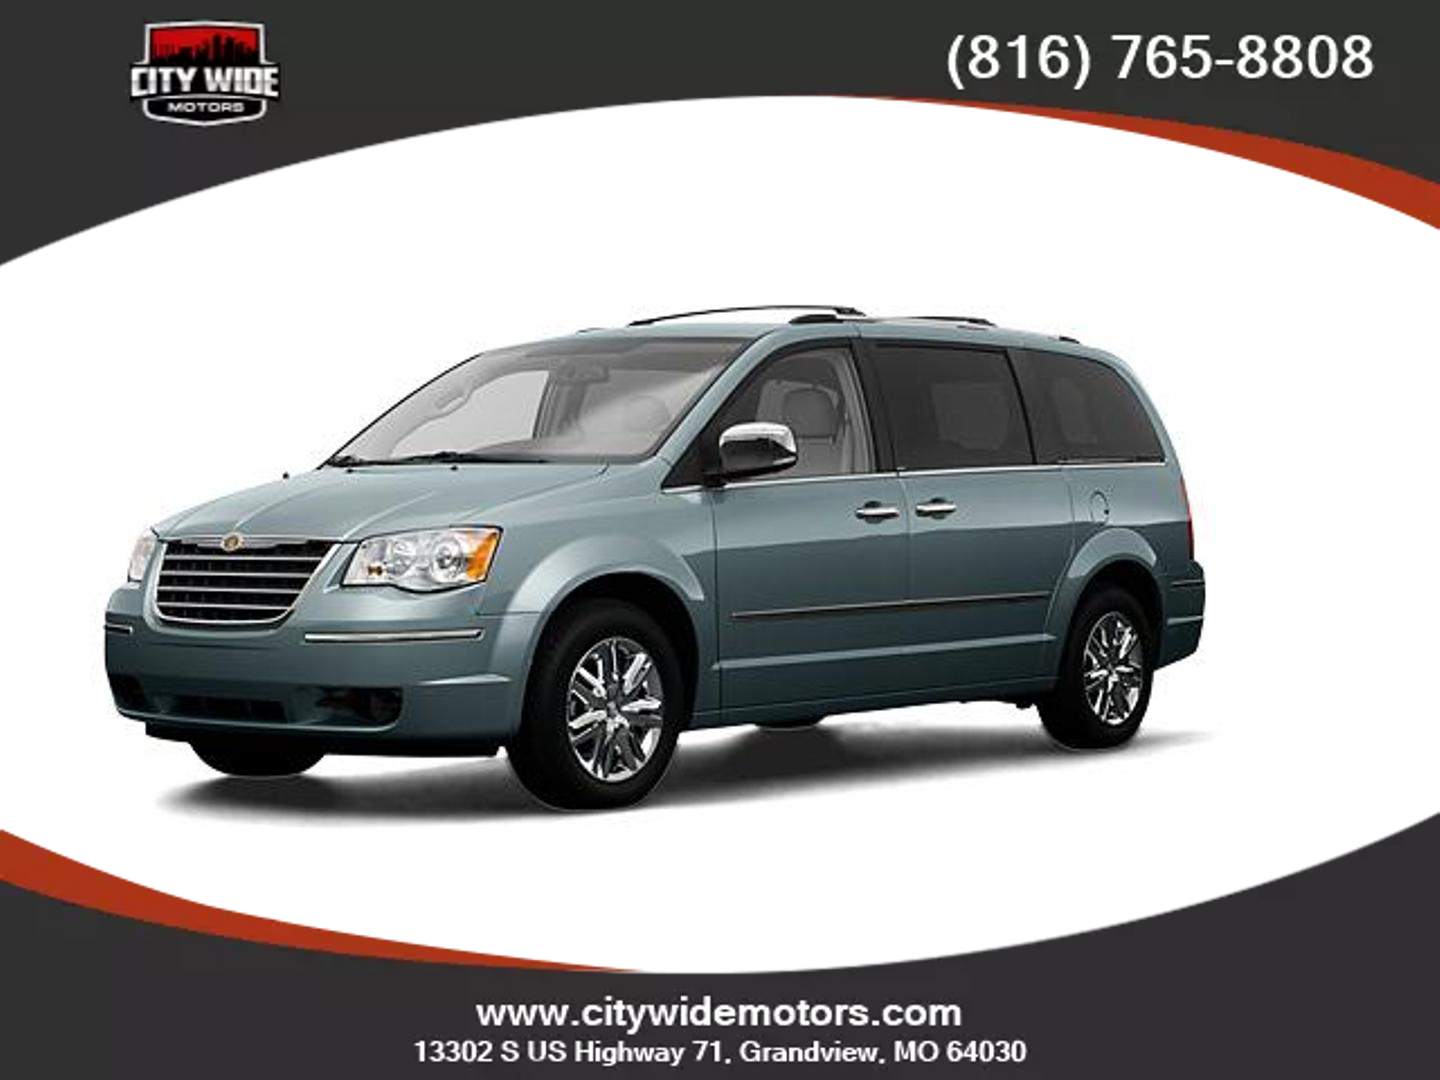 USED CHRYSLER TOWN & COUNTRY 2008 for sale in Grandview